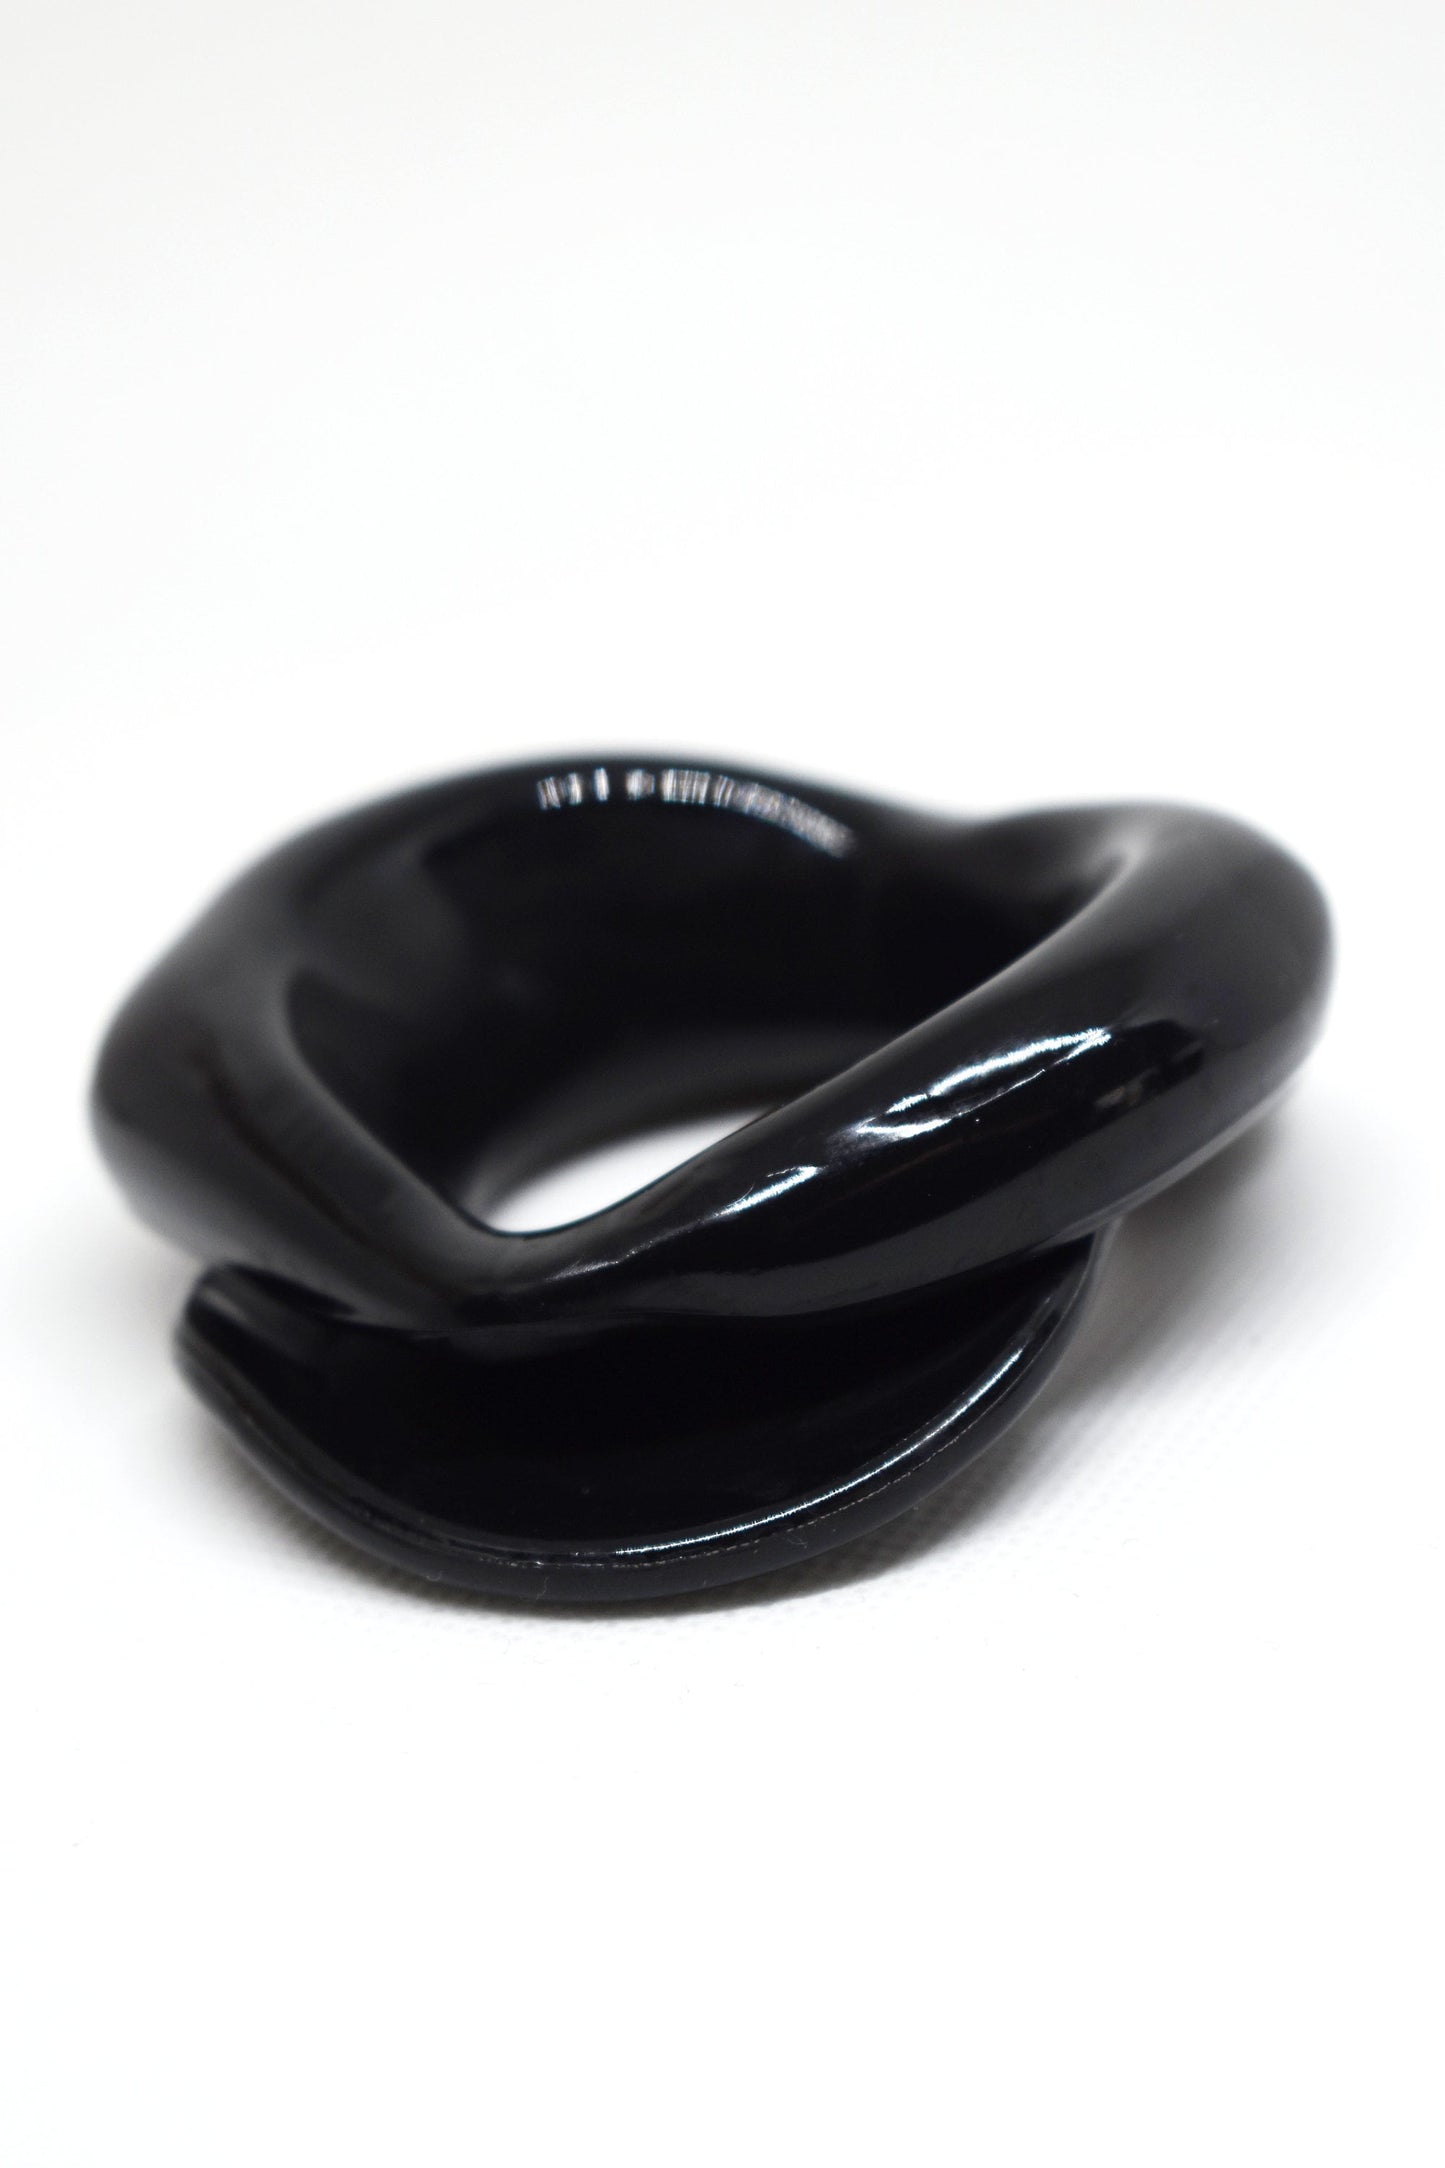 Silicone Mouth Black, Fetish Product, BDSM